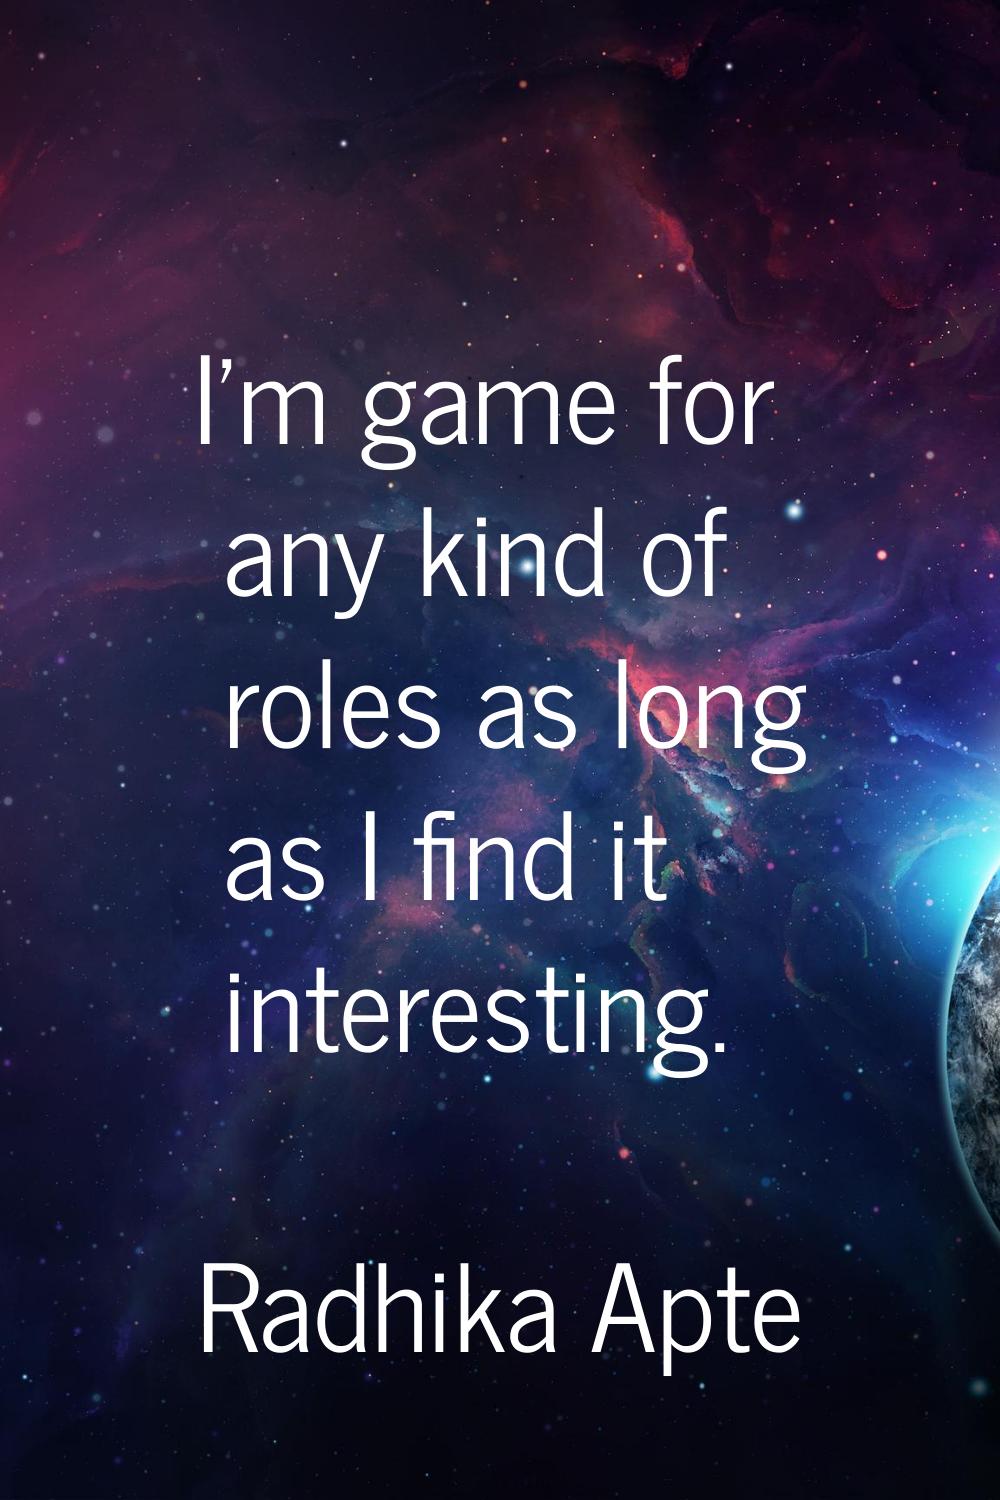 I'm game for any kind of roles as long as I find it interesting.